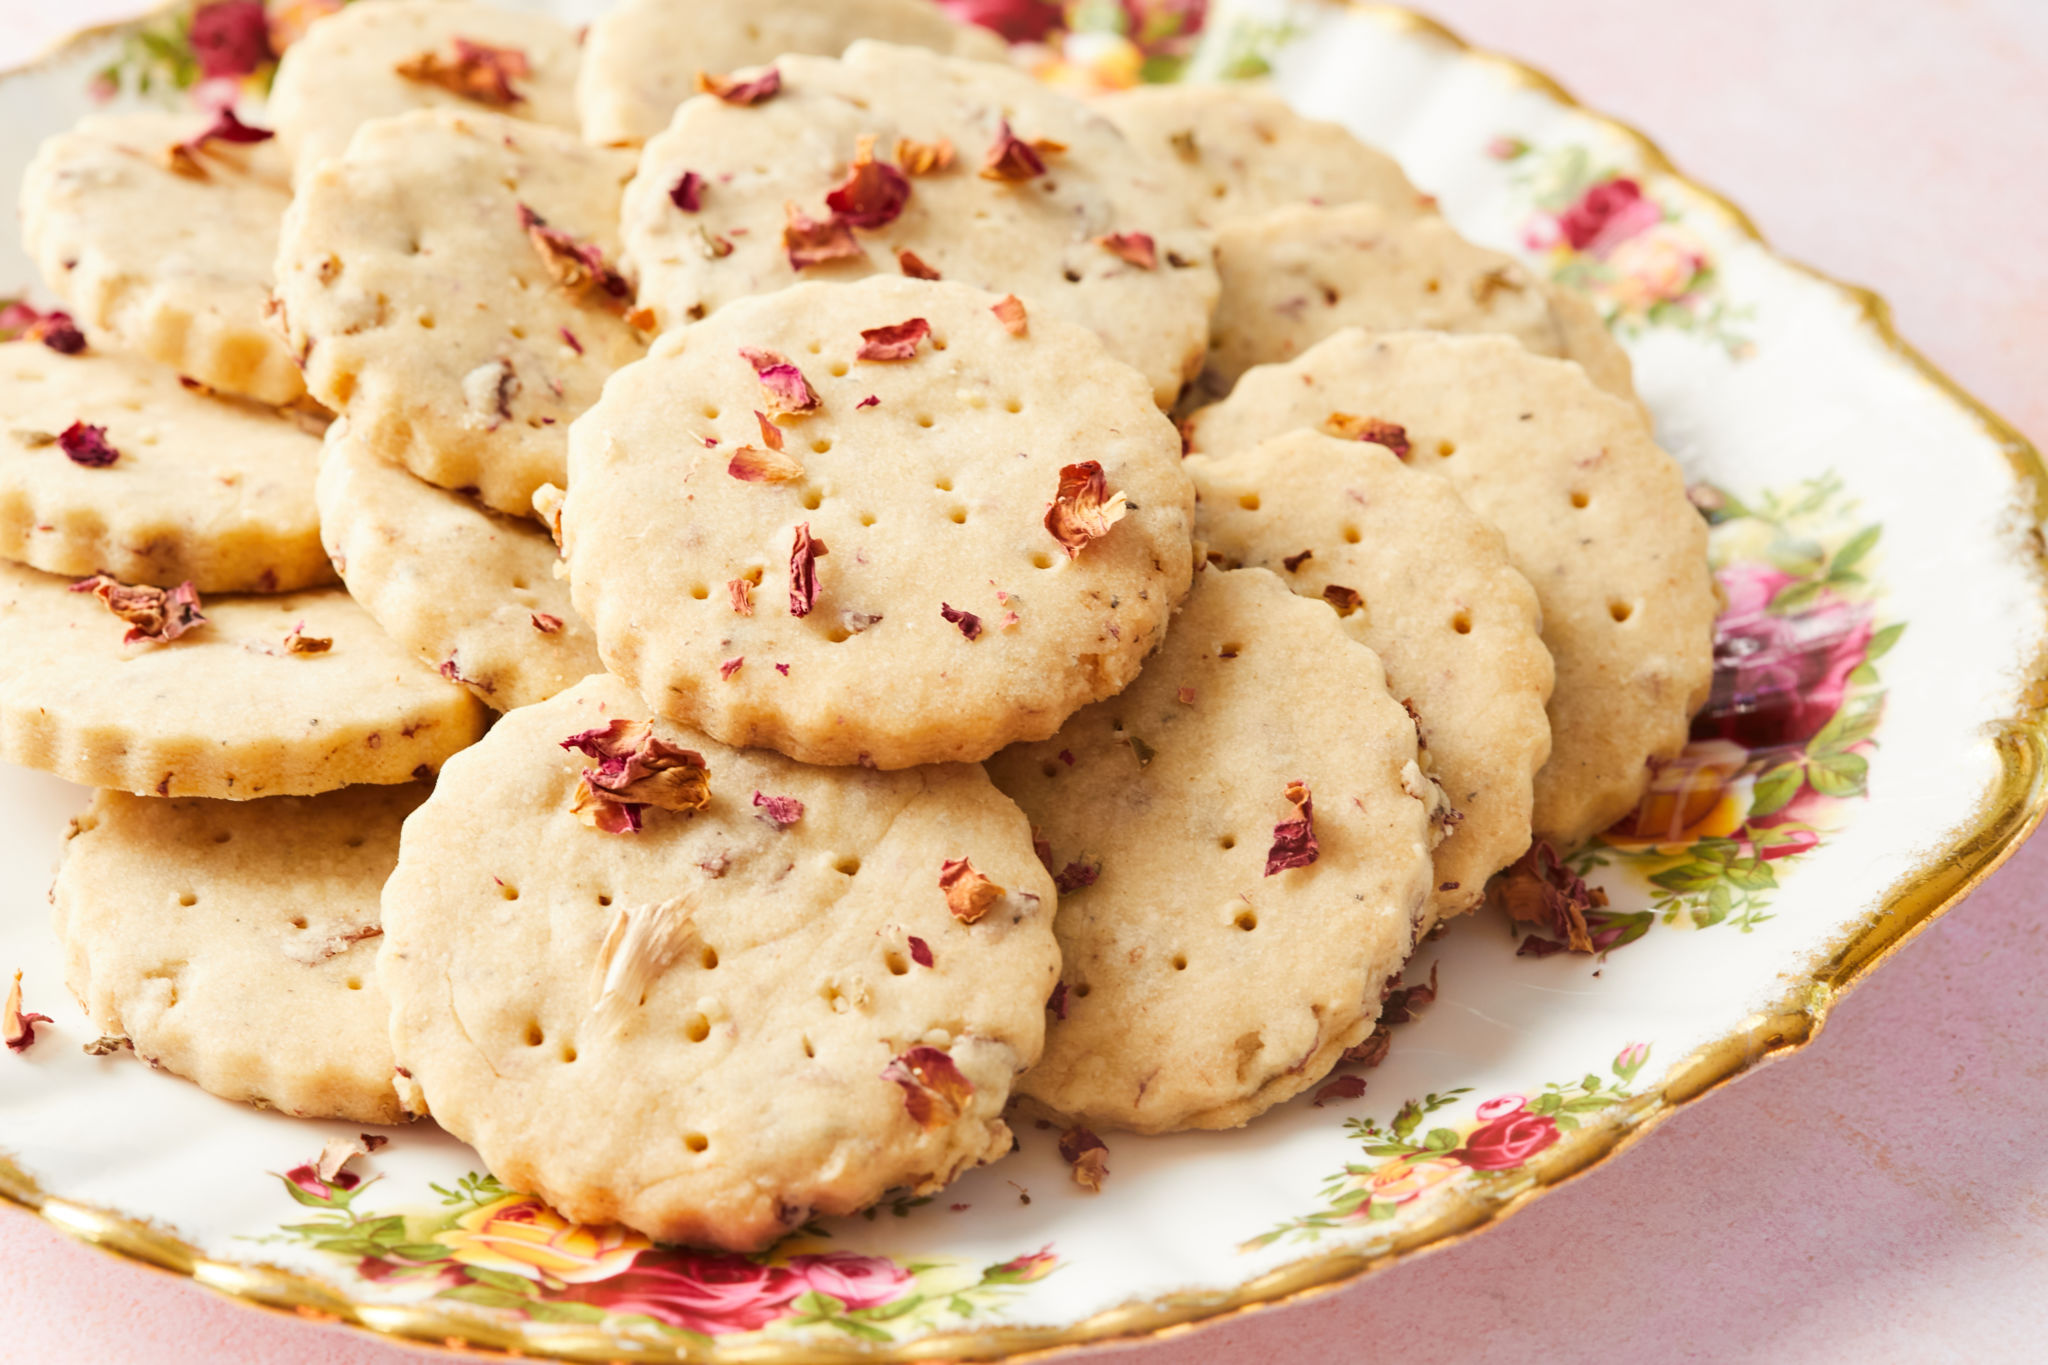 A plate or rose and cardamom cookies.